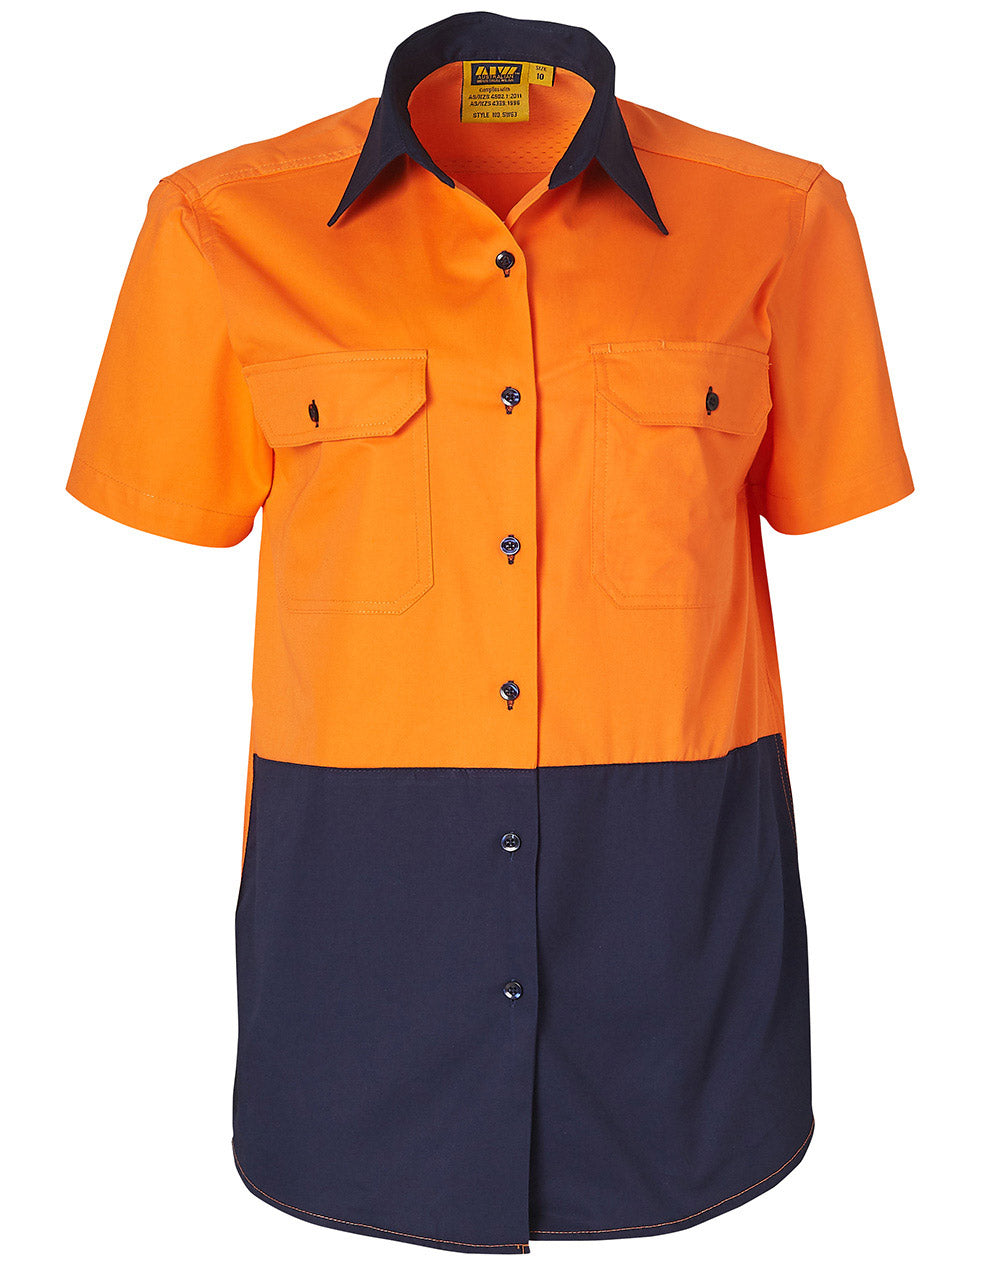 Ladies C/breeze Day Short Sleeve Shirt - made by AIW